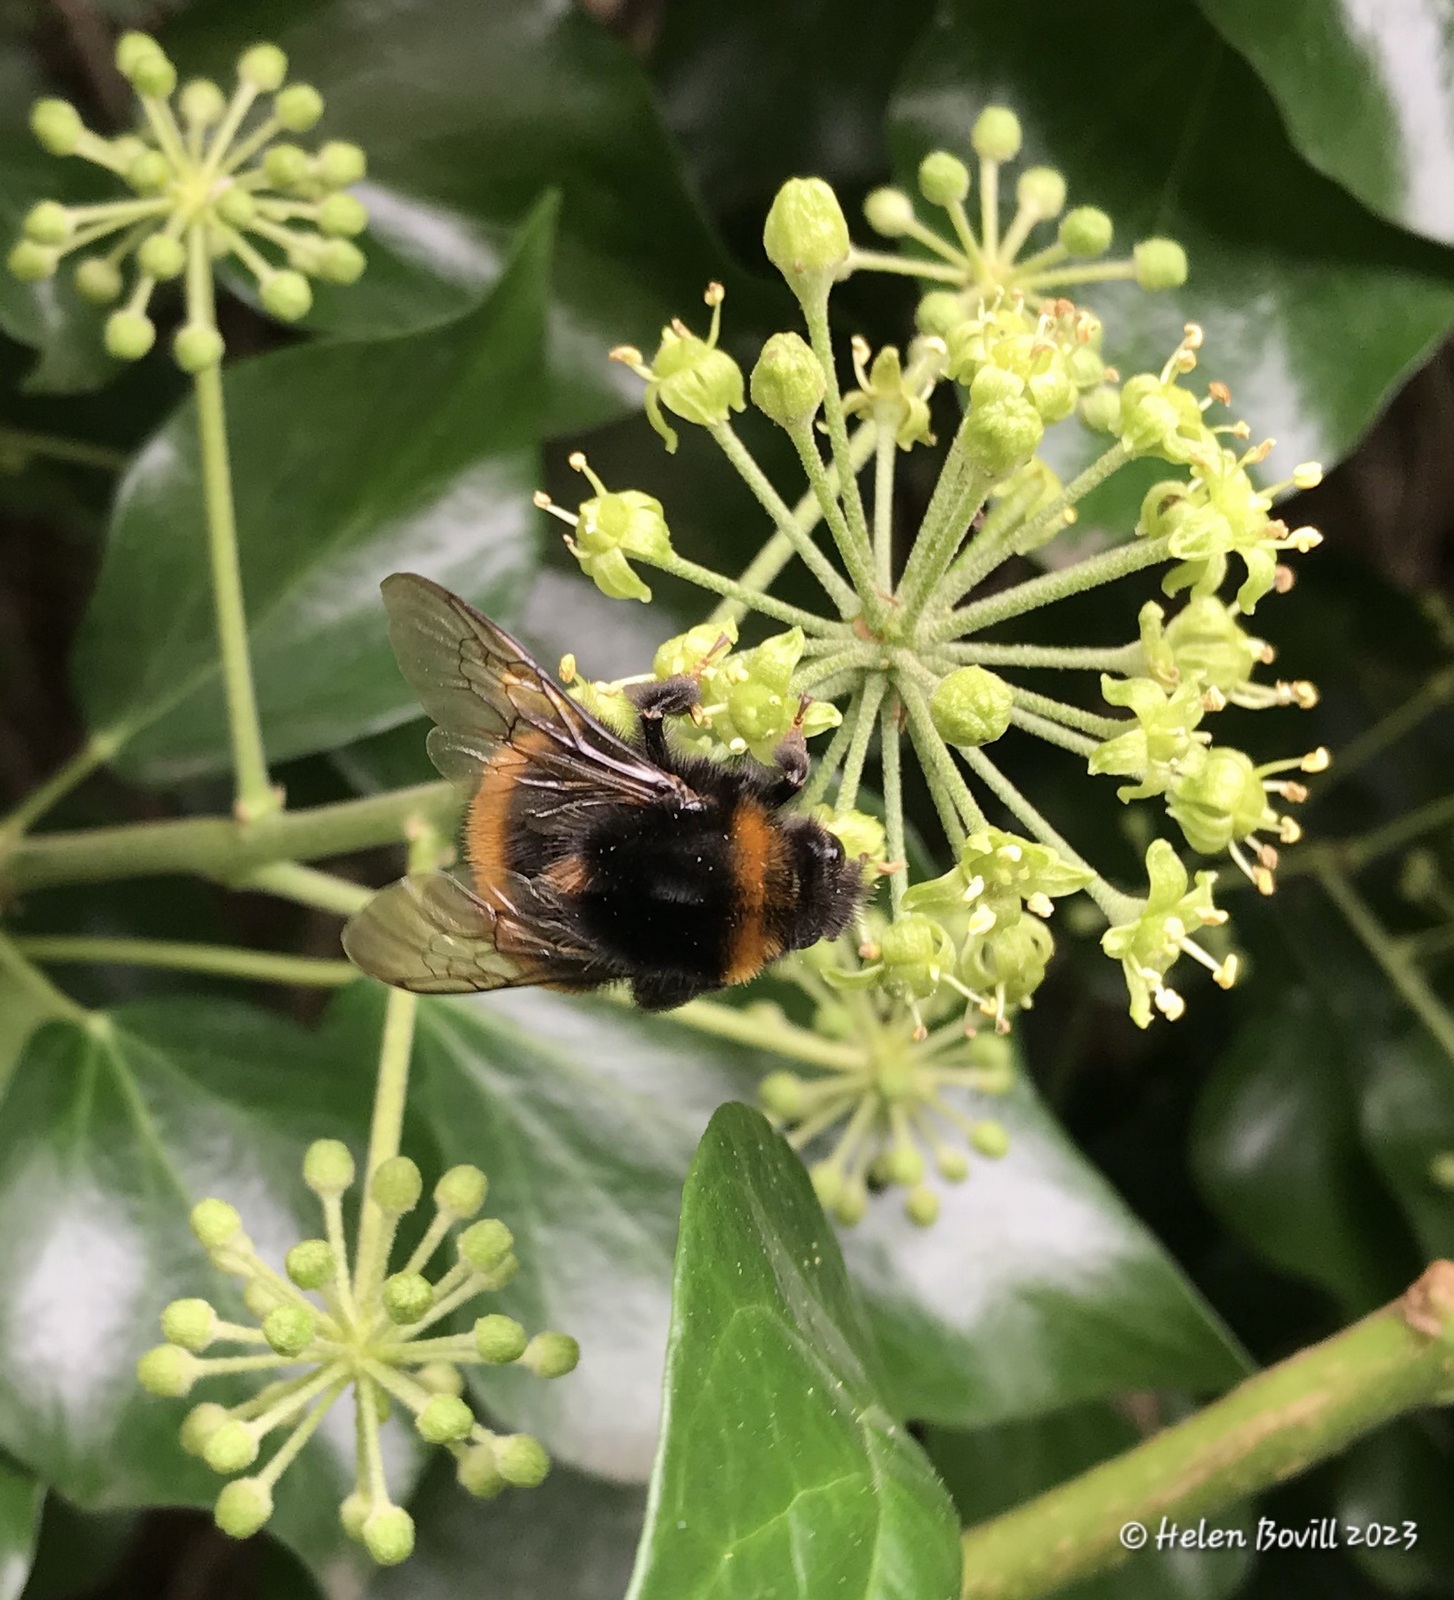 A Queen Buff-Tailed Bumblebee nectaring on Ivy flowers